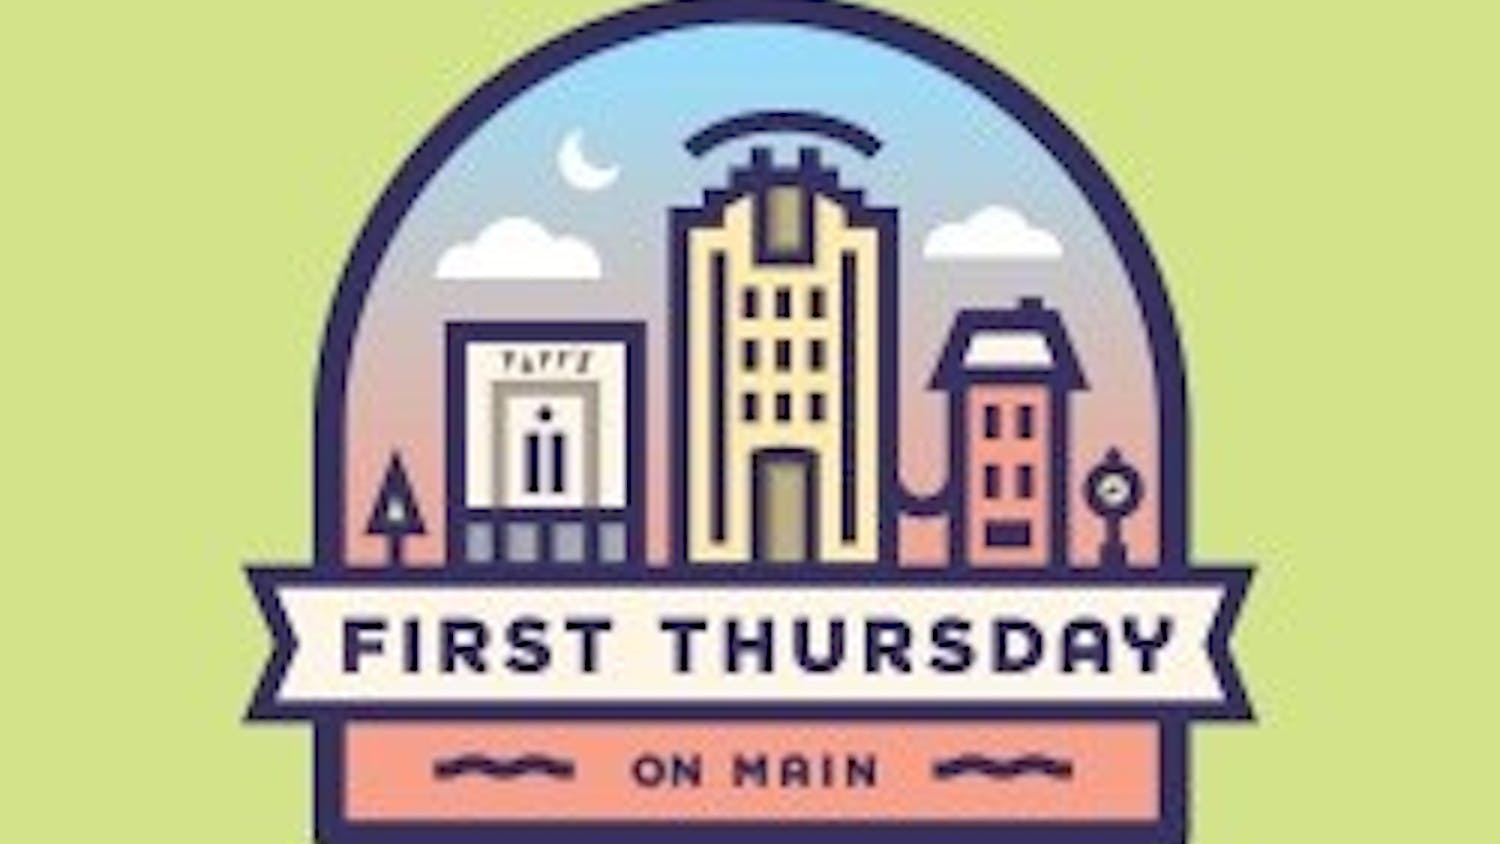 First Thursday on Main&nbsp;returns to Columbia on April 7 with local art, music, food and drink.